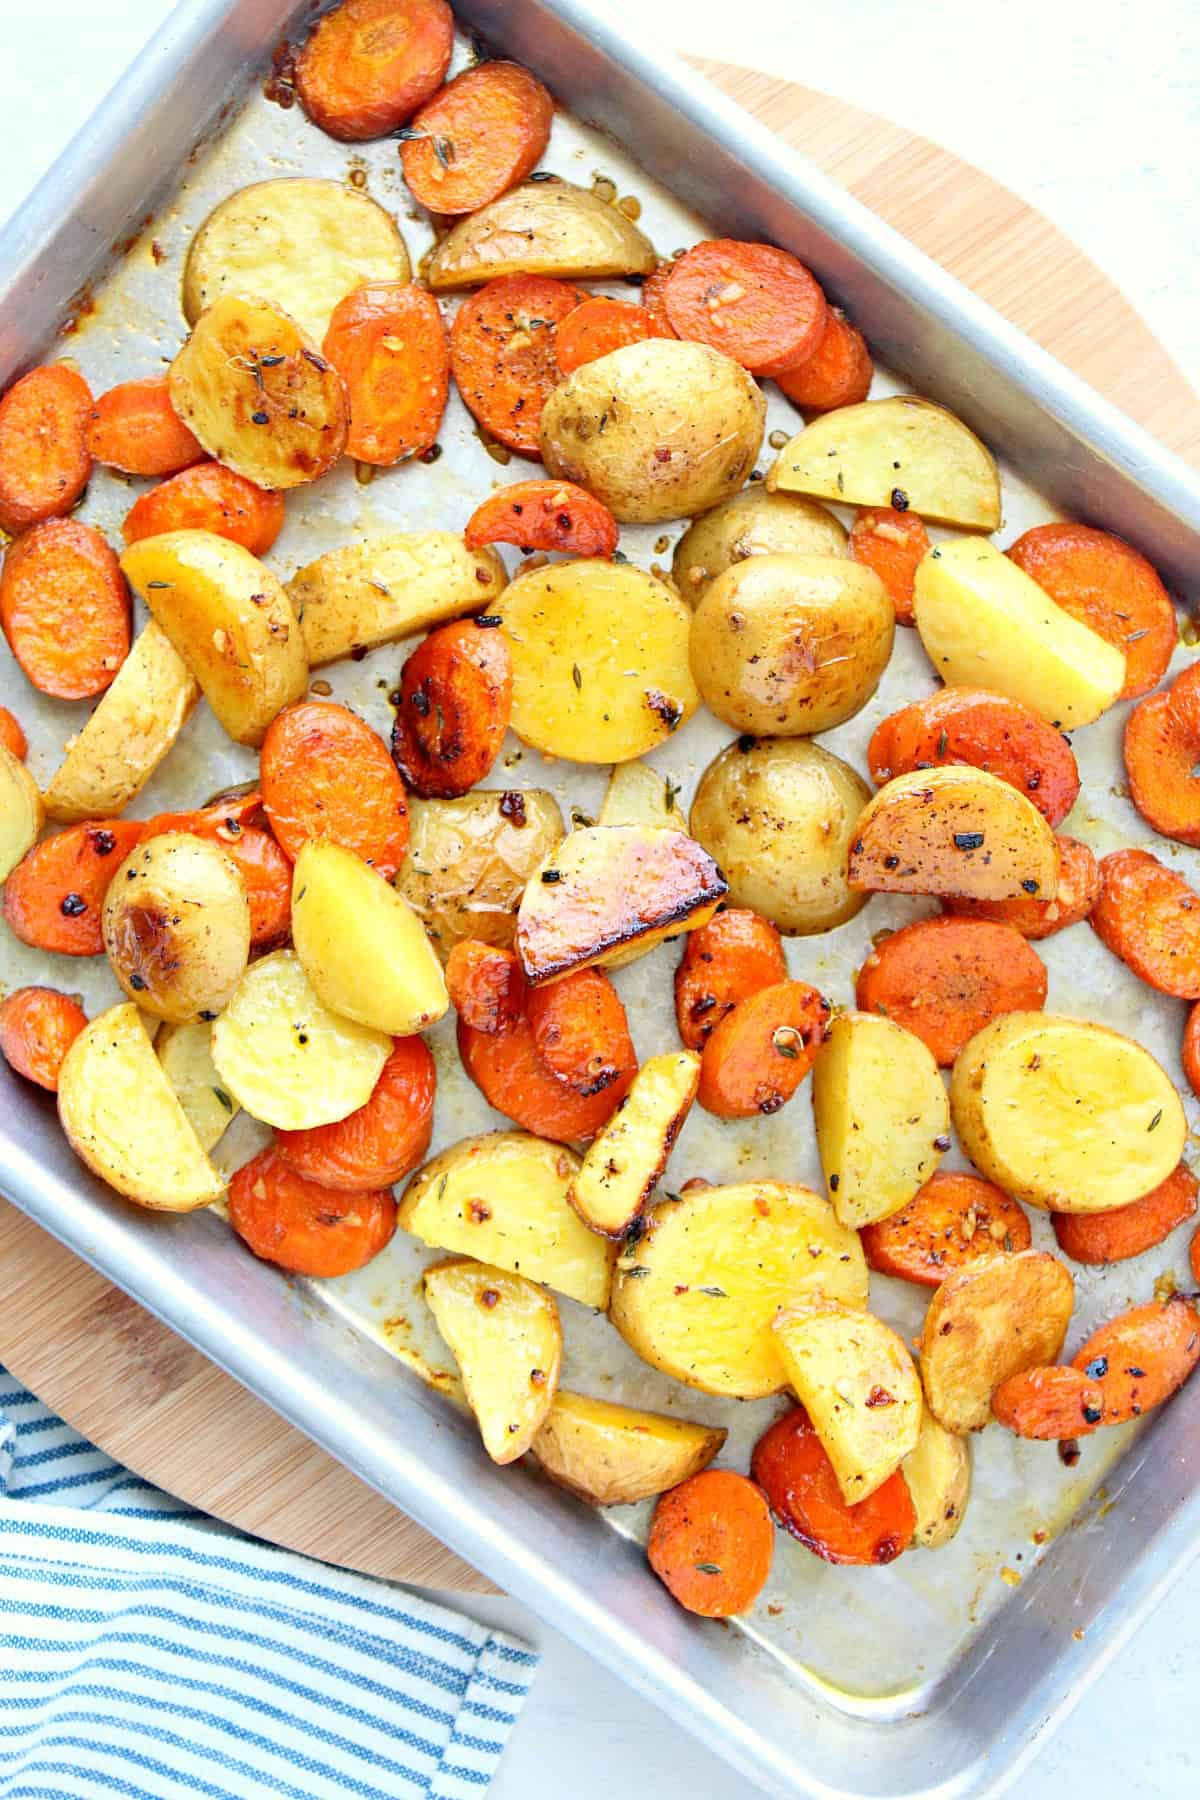 roasted potatoes and carrots B Roasted Potatoes and Carrots